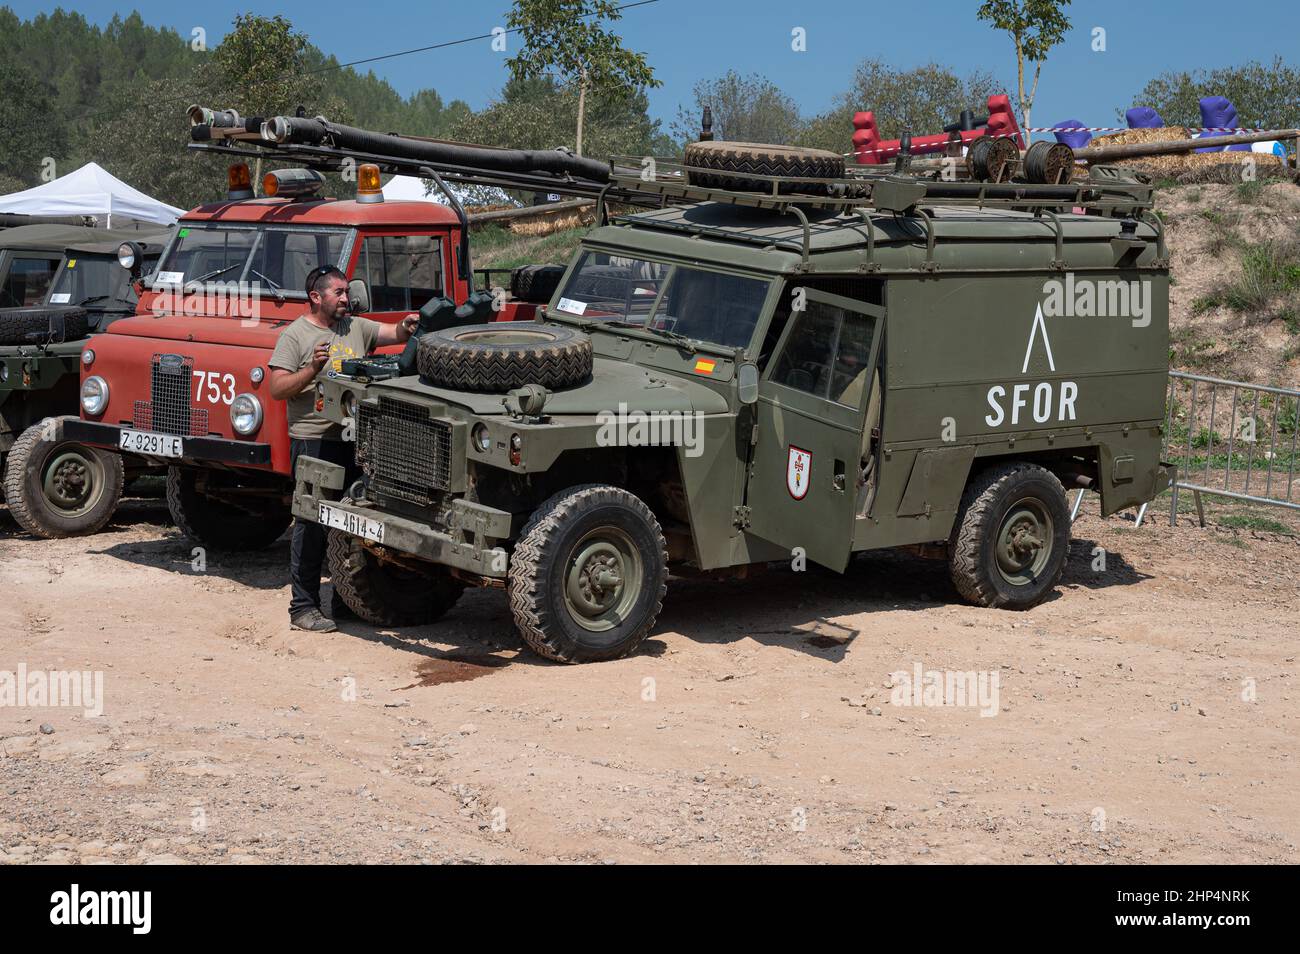 A view of Land Rover Santana Ligero of the SFOR military army on a sunny day in Suria, Spain Stock Photo